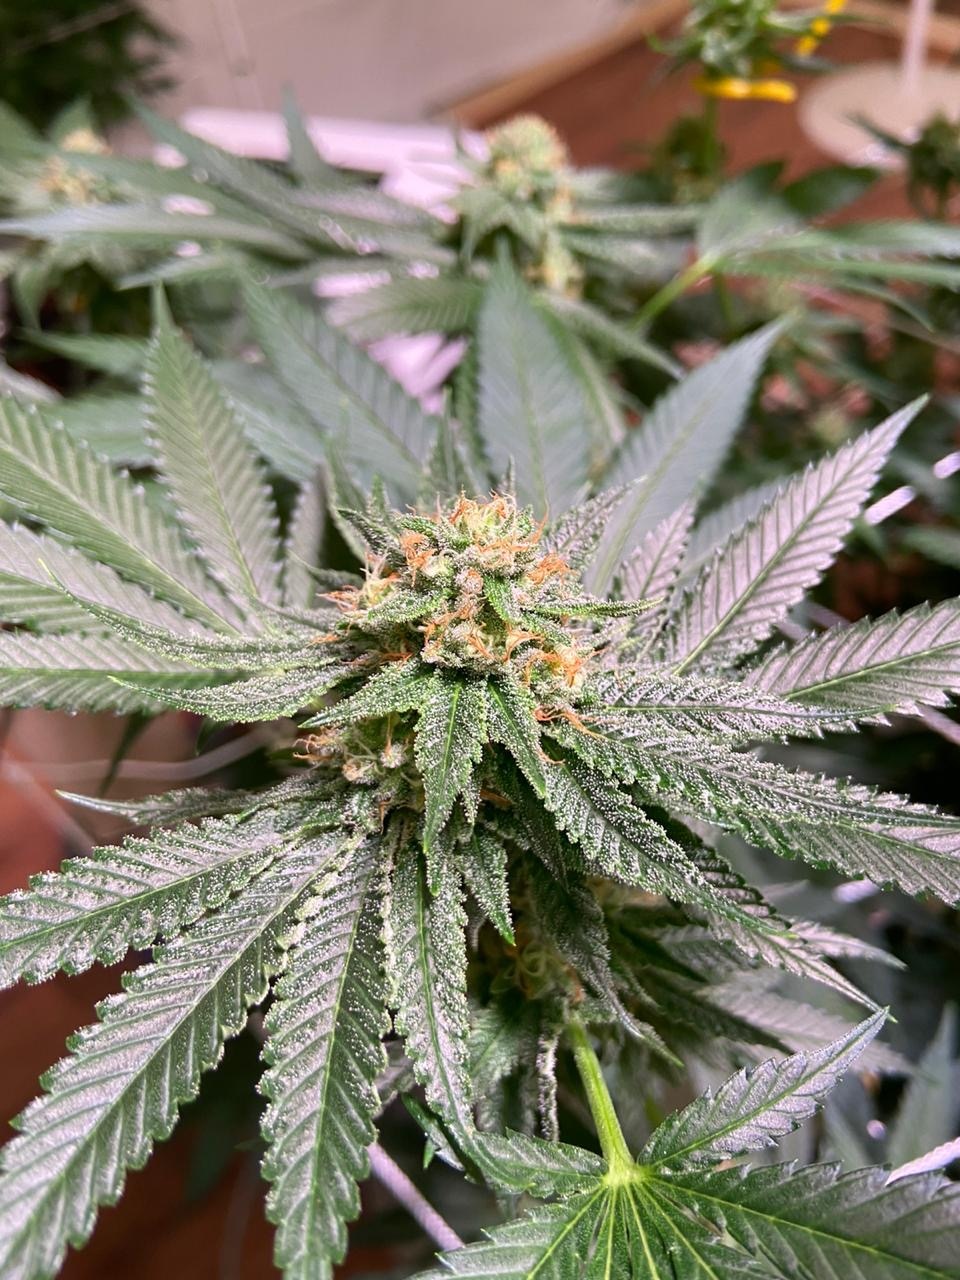 Help needed pistils turning orange to fast only on week 4 2